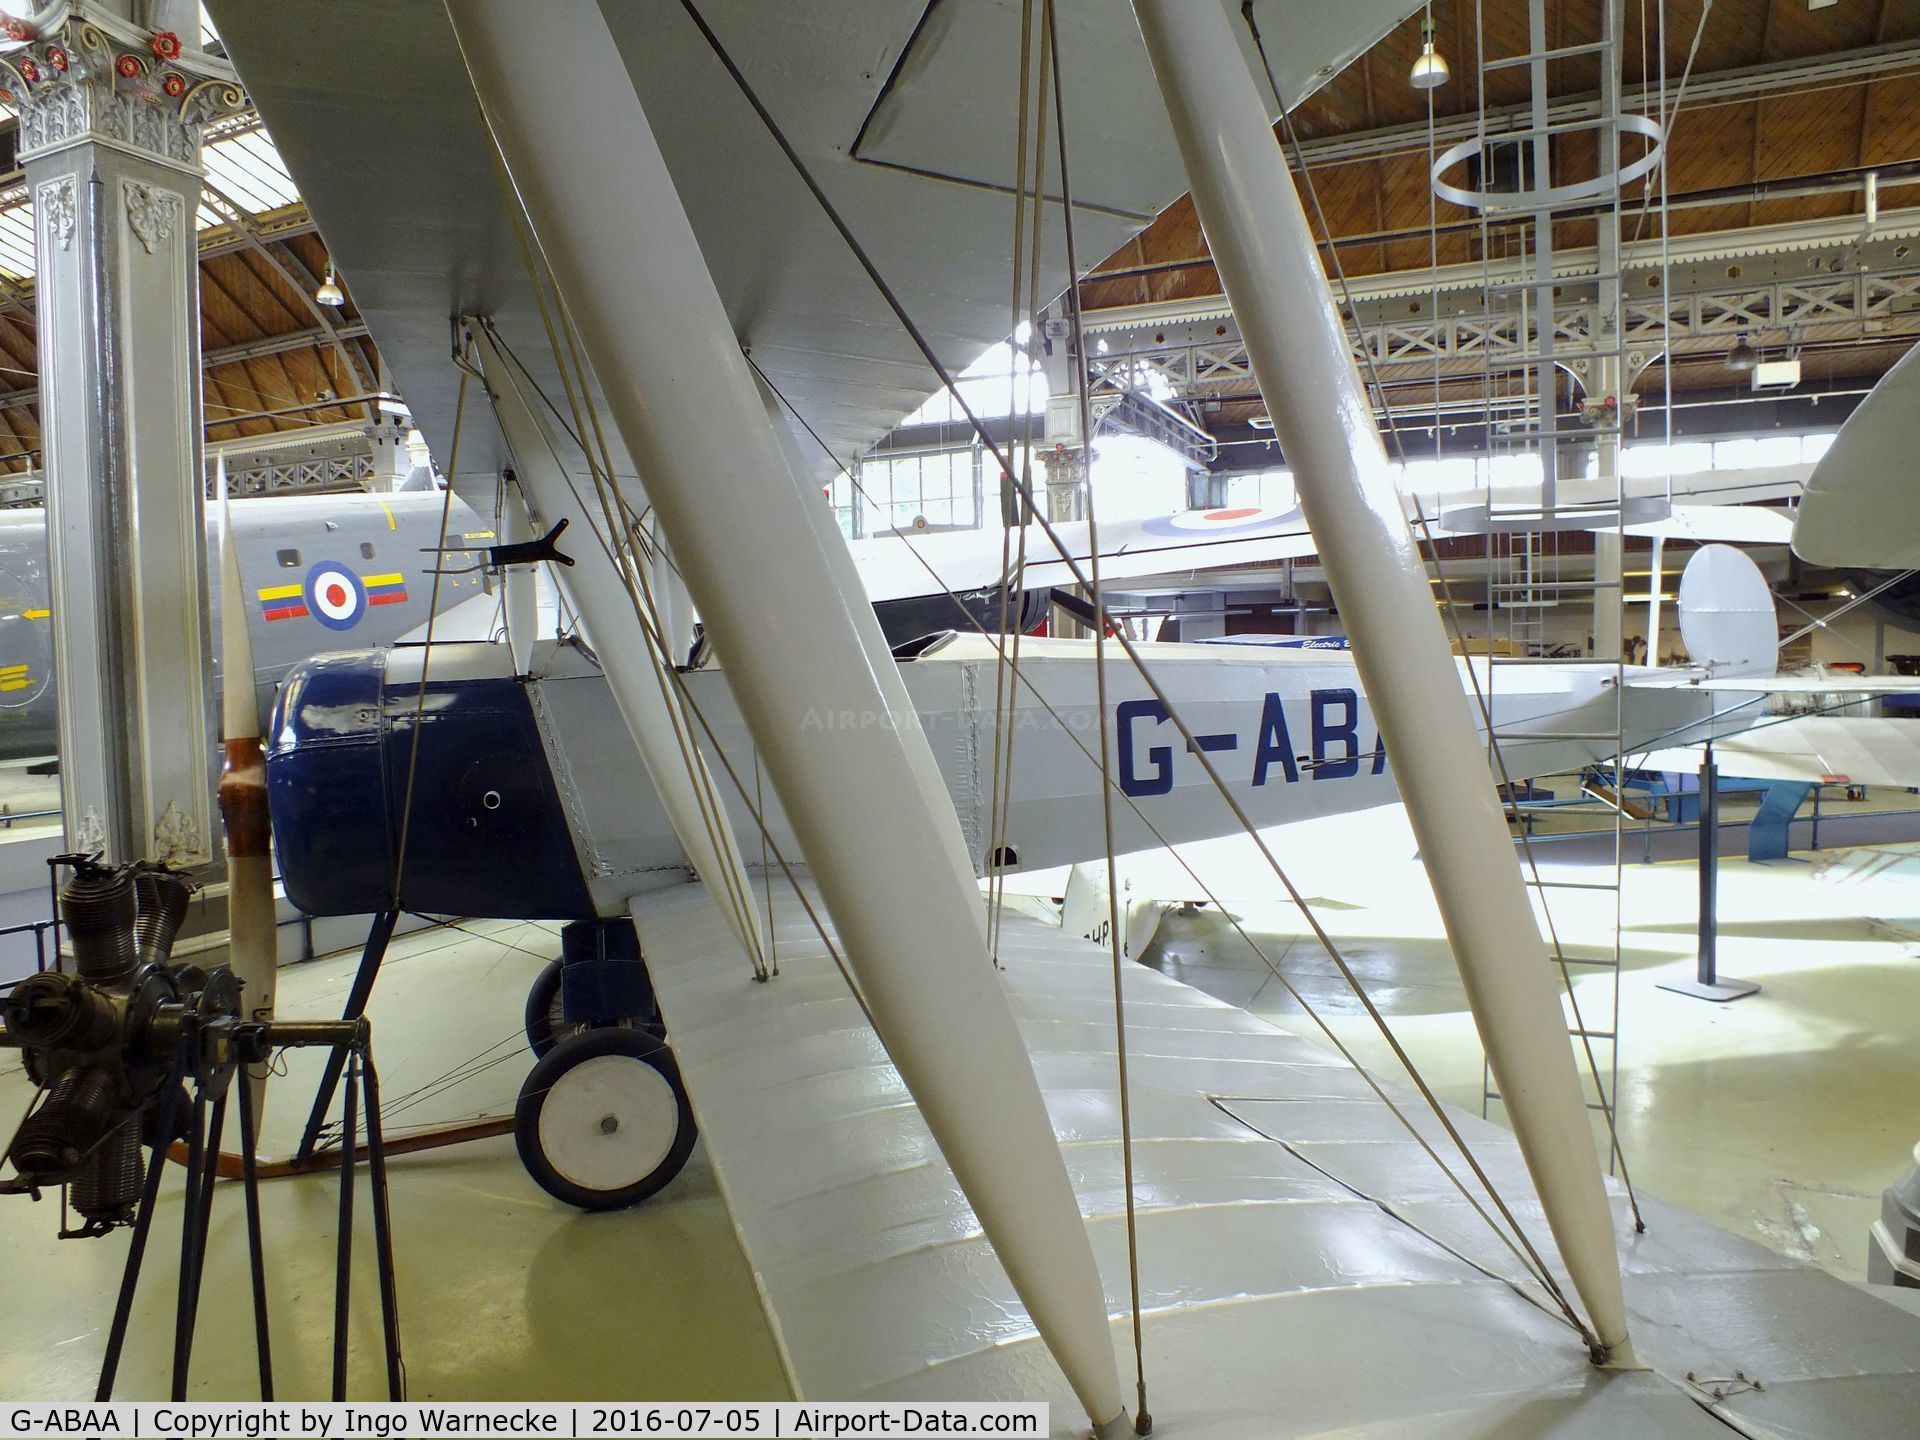 G-ABAA, Avro 504K C/N H2311, Avro 504K at the Museum of Science and Industry, Manchester